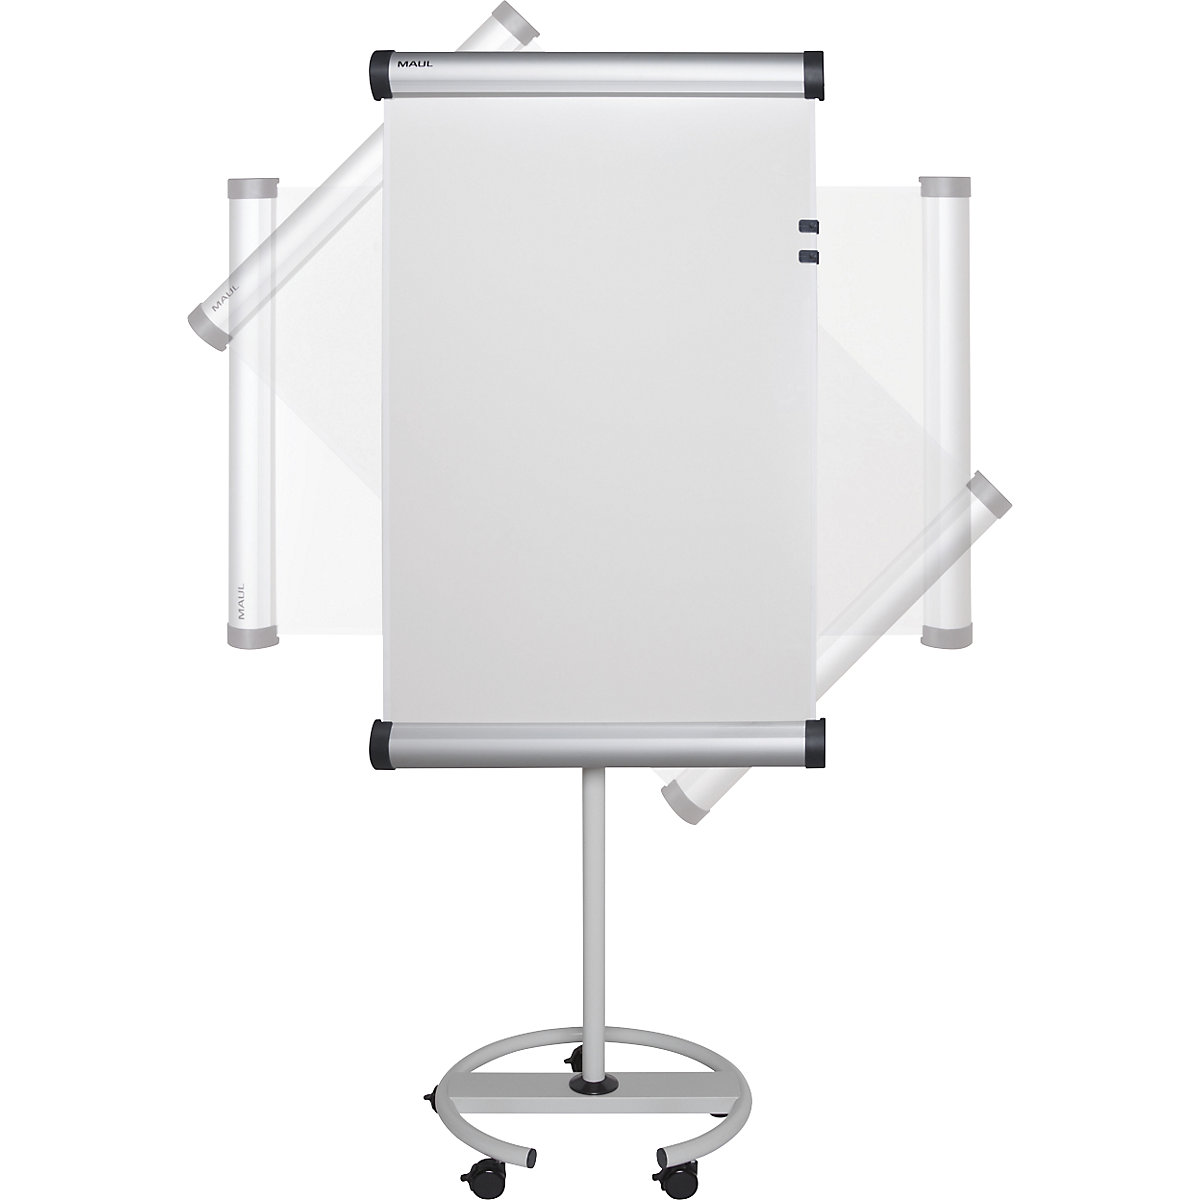 Executive Flip Chart Stand in Wuse - Stationery, Merkins Global